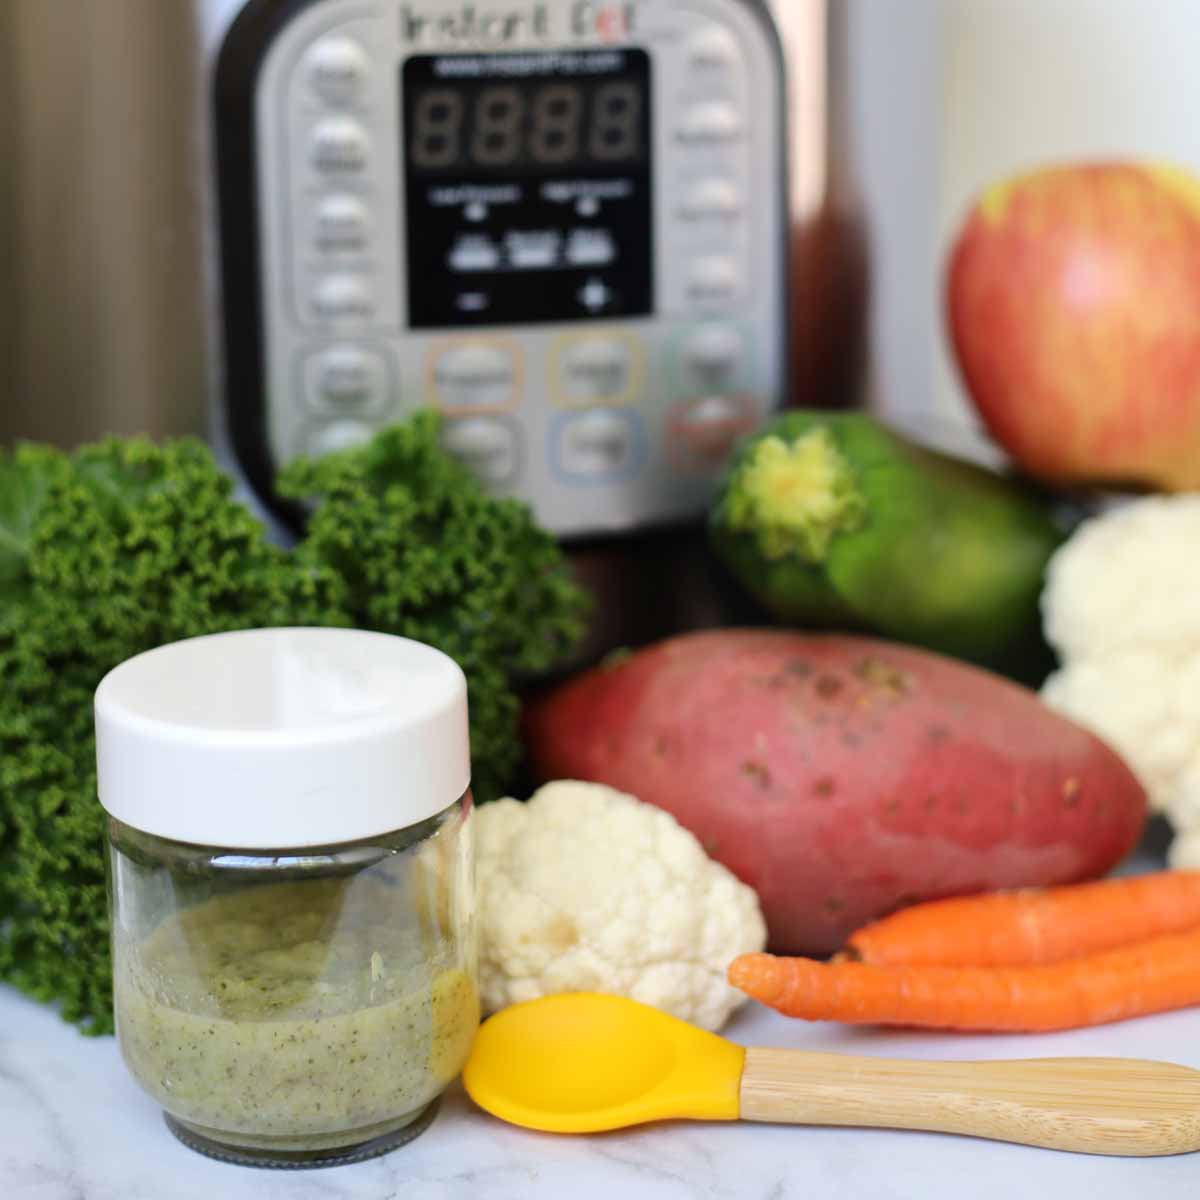 Baby food, vegetables in background with instant pot